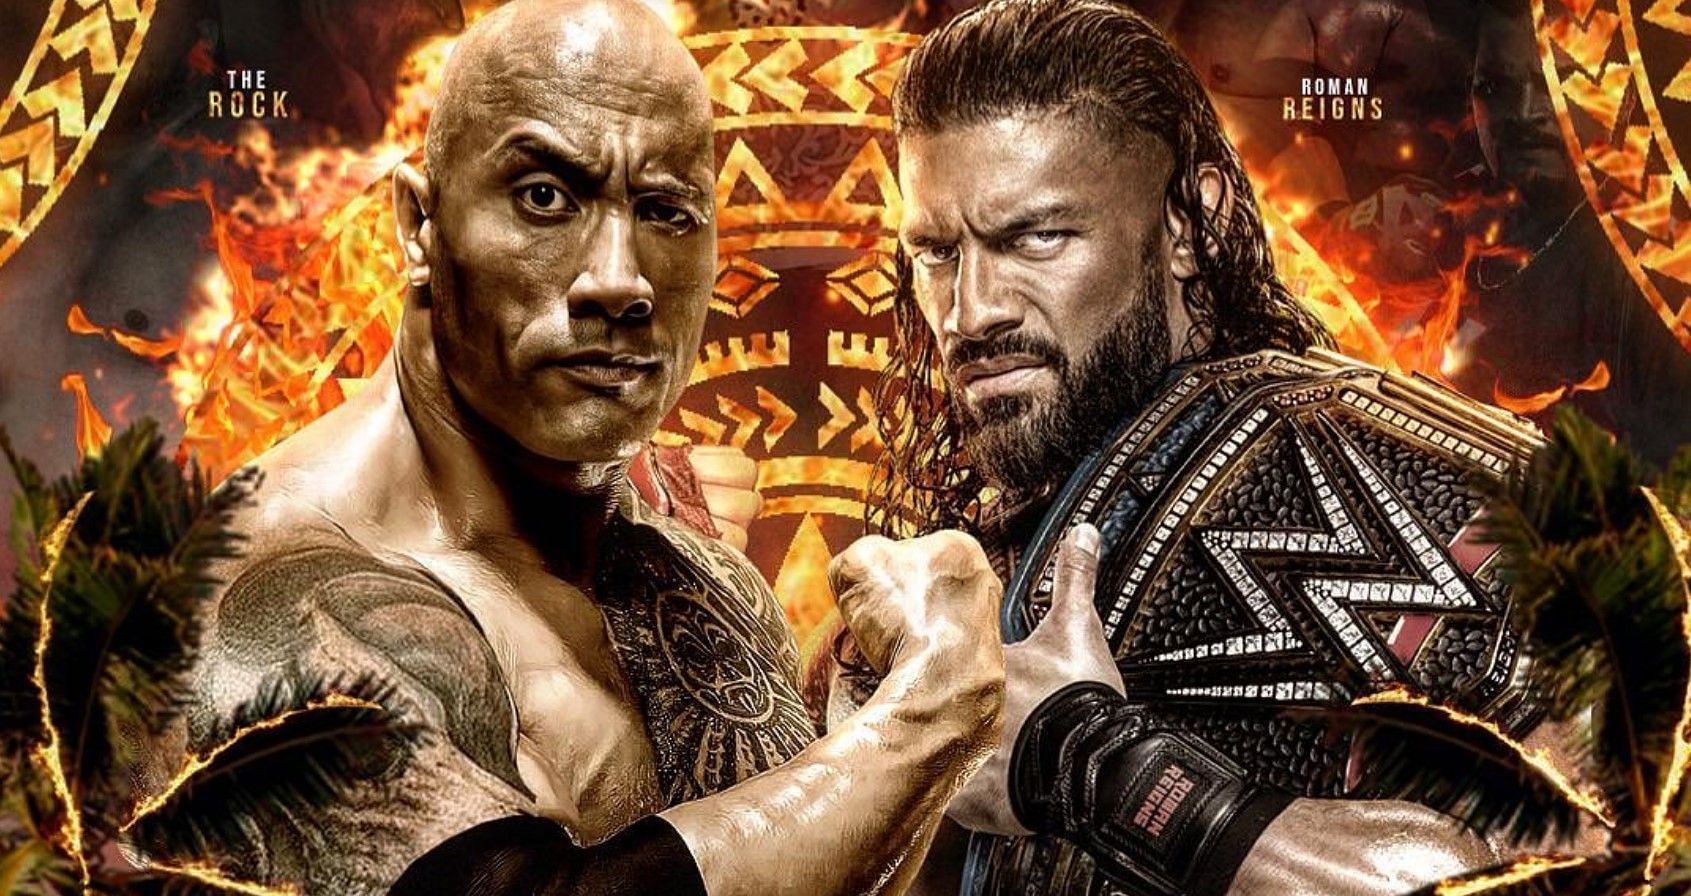 Roman Reigns vs. The Rock could happen at WWE WrestleMania 39.